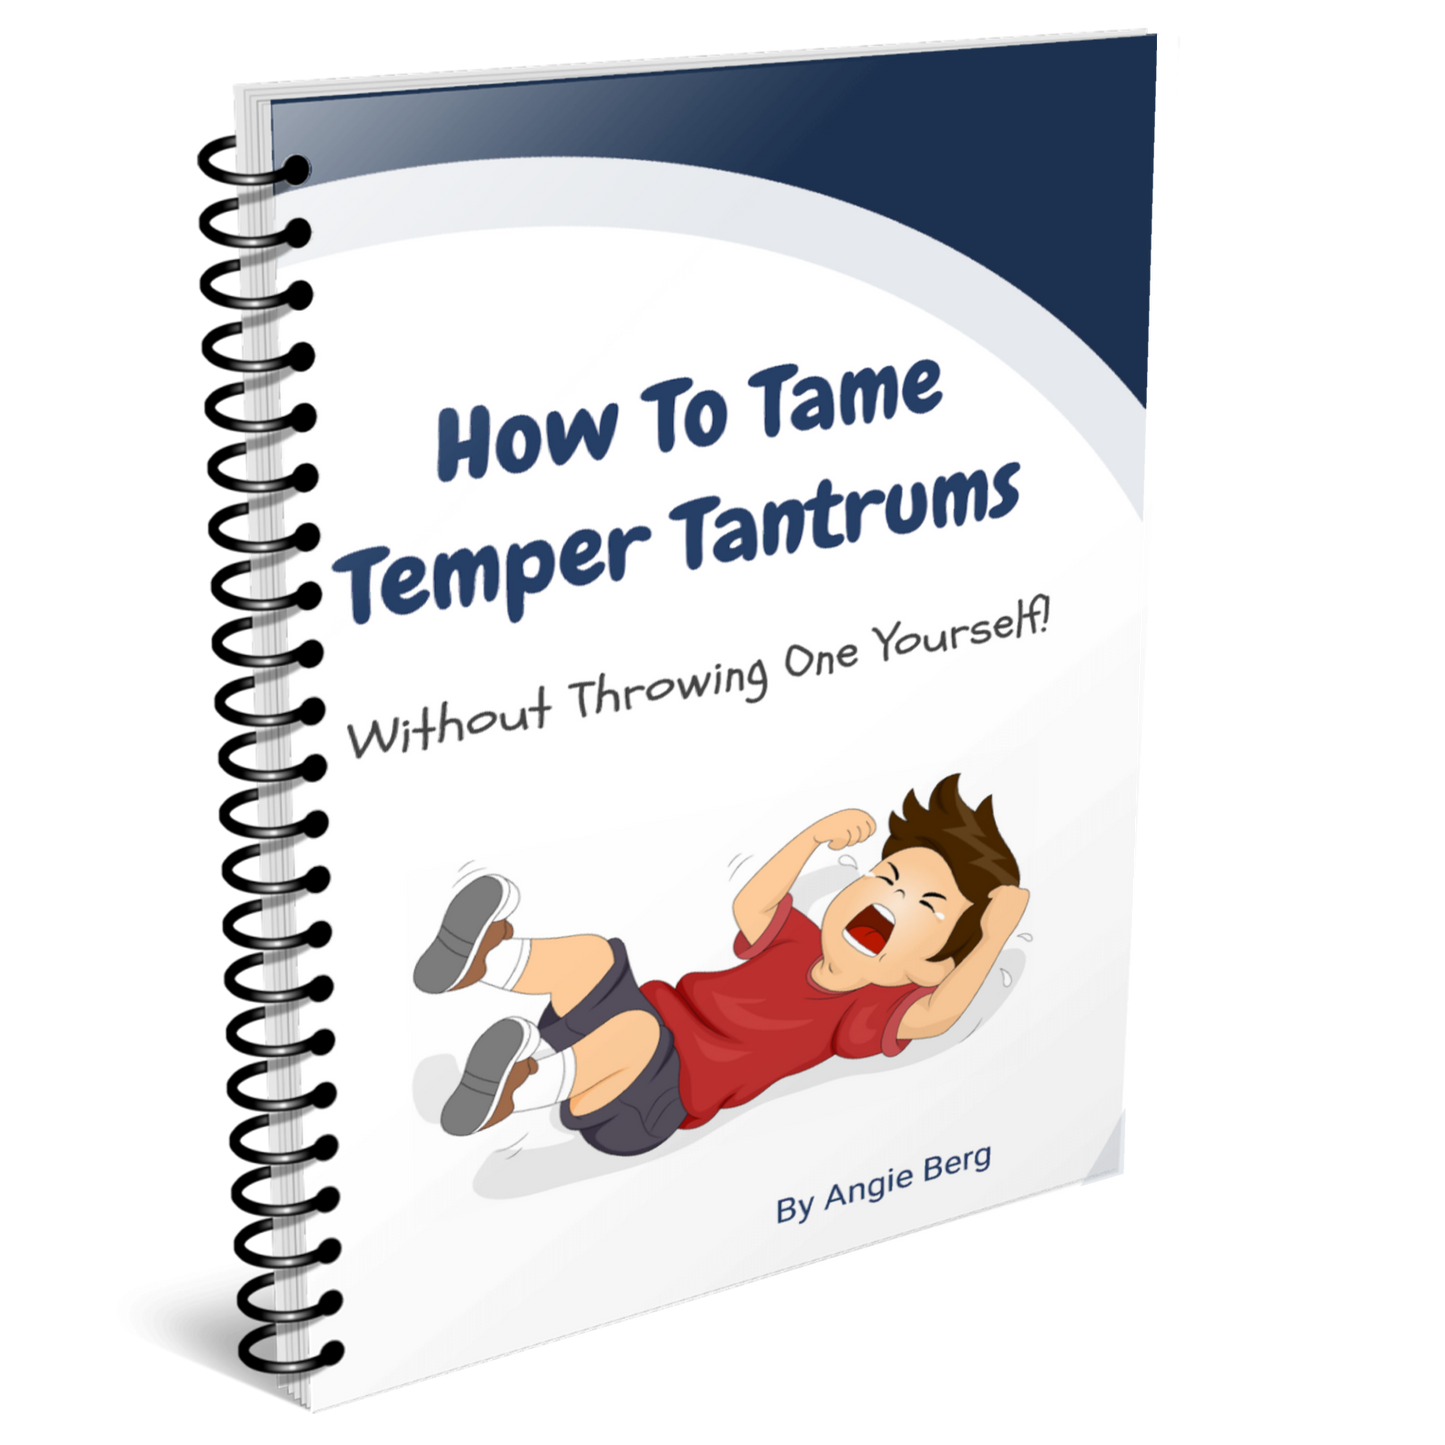 How To Tame Temper Tantrums Without Throwing One Yourself!